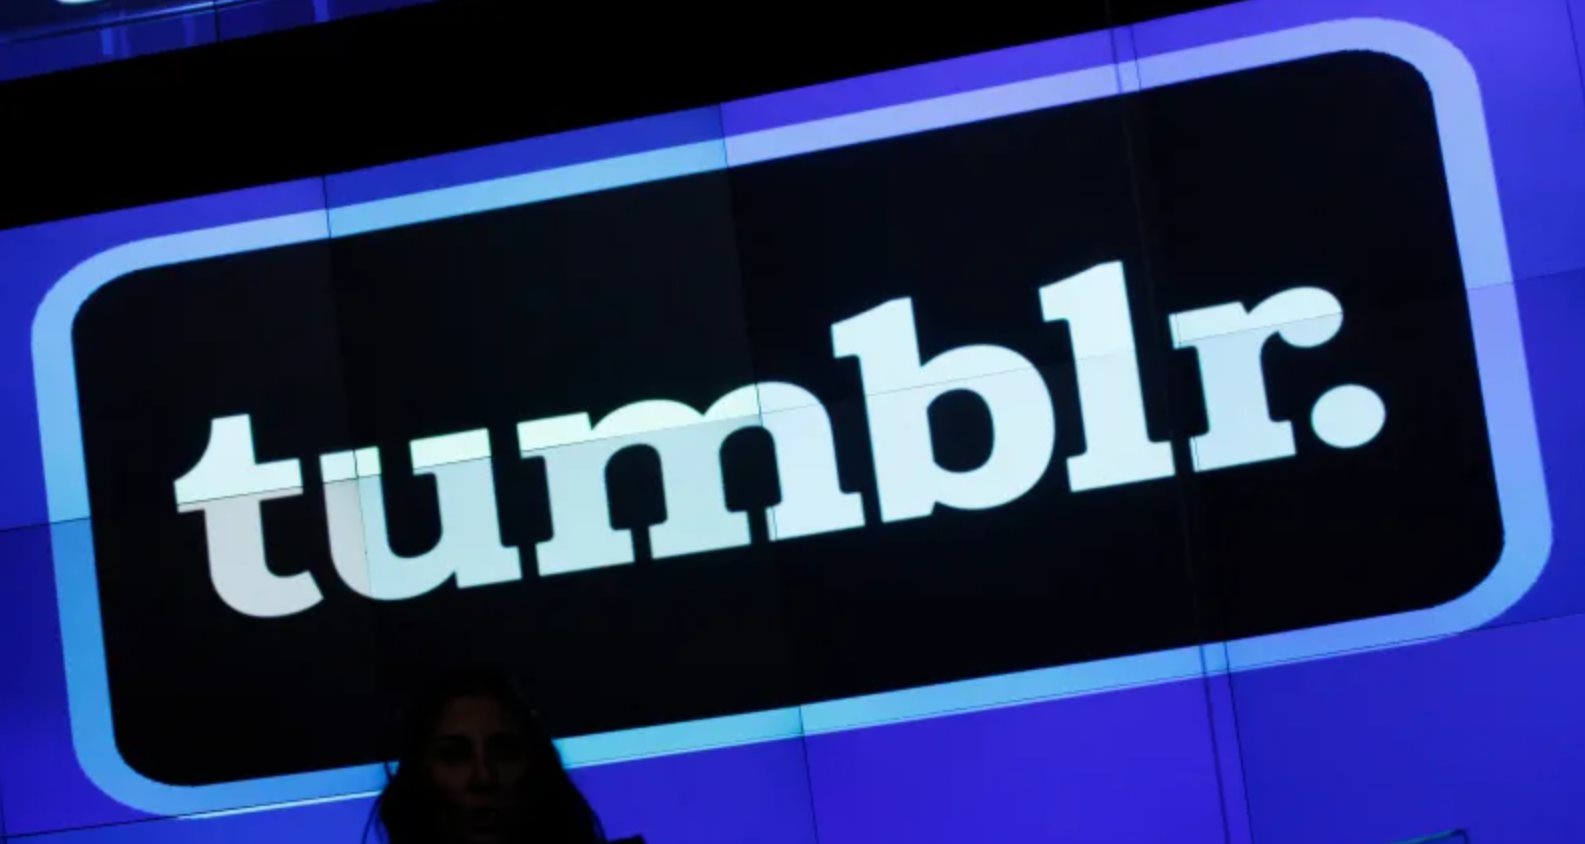 Tumblr for ios goes dark all of a sudden apple tight lipped 523851 2